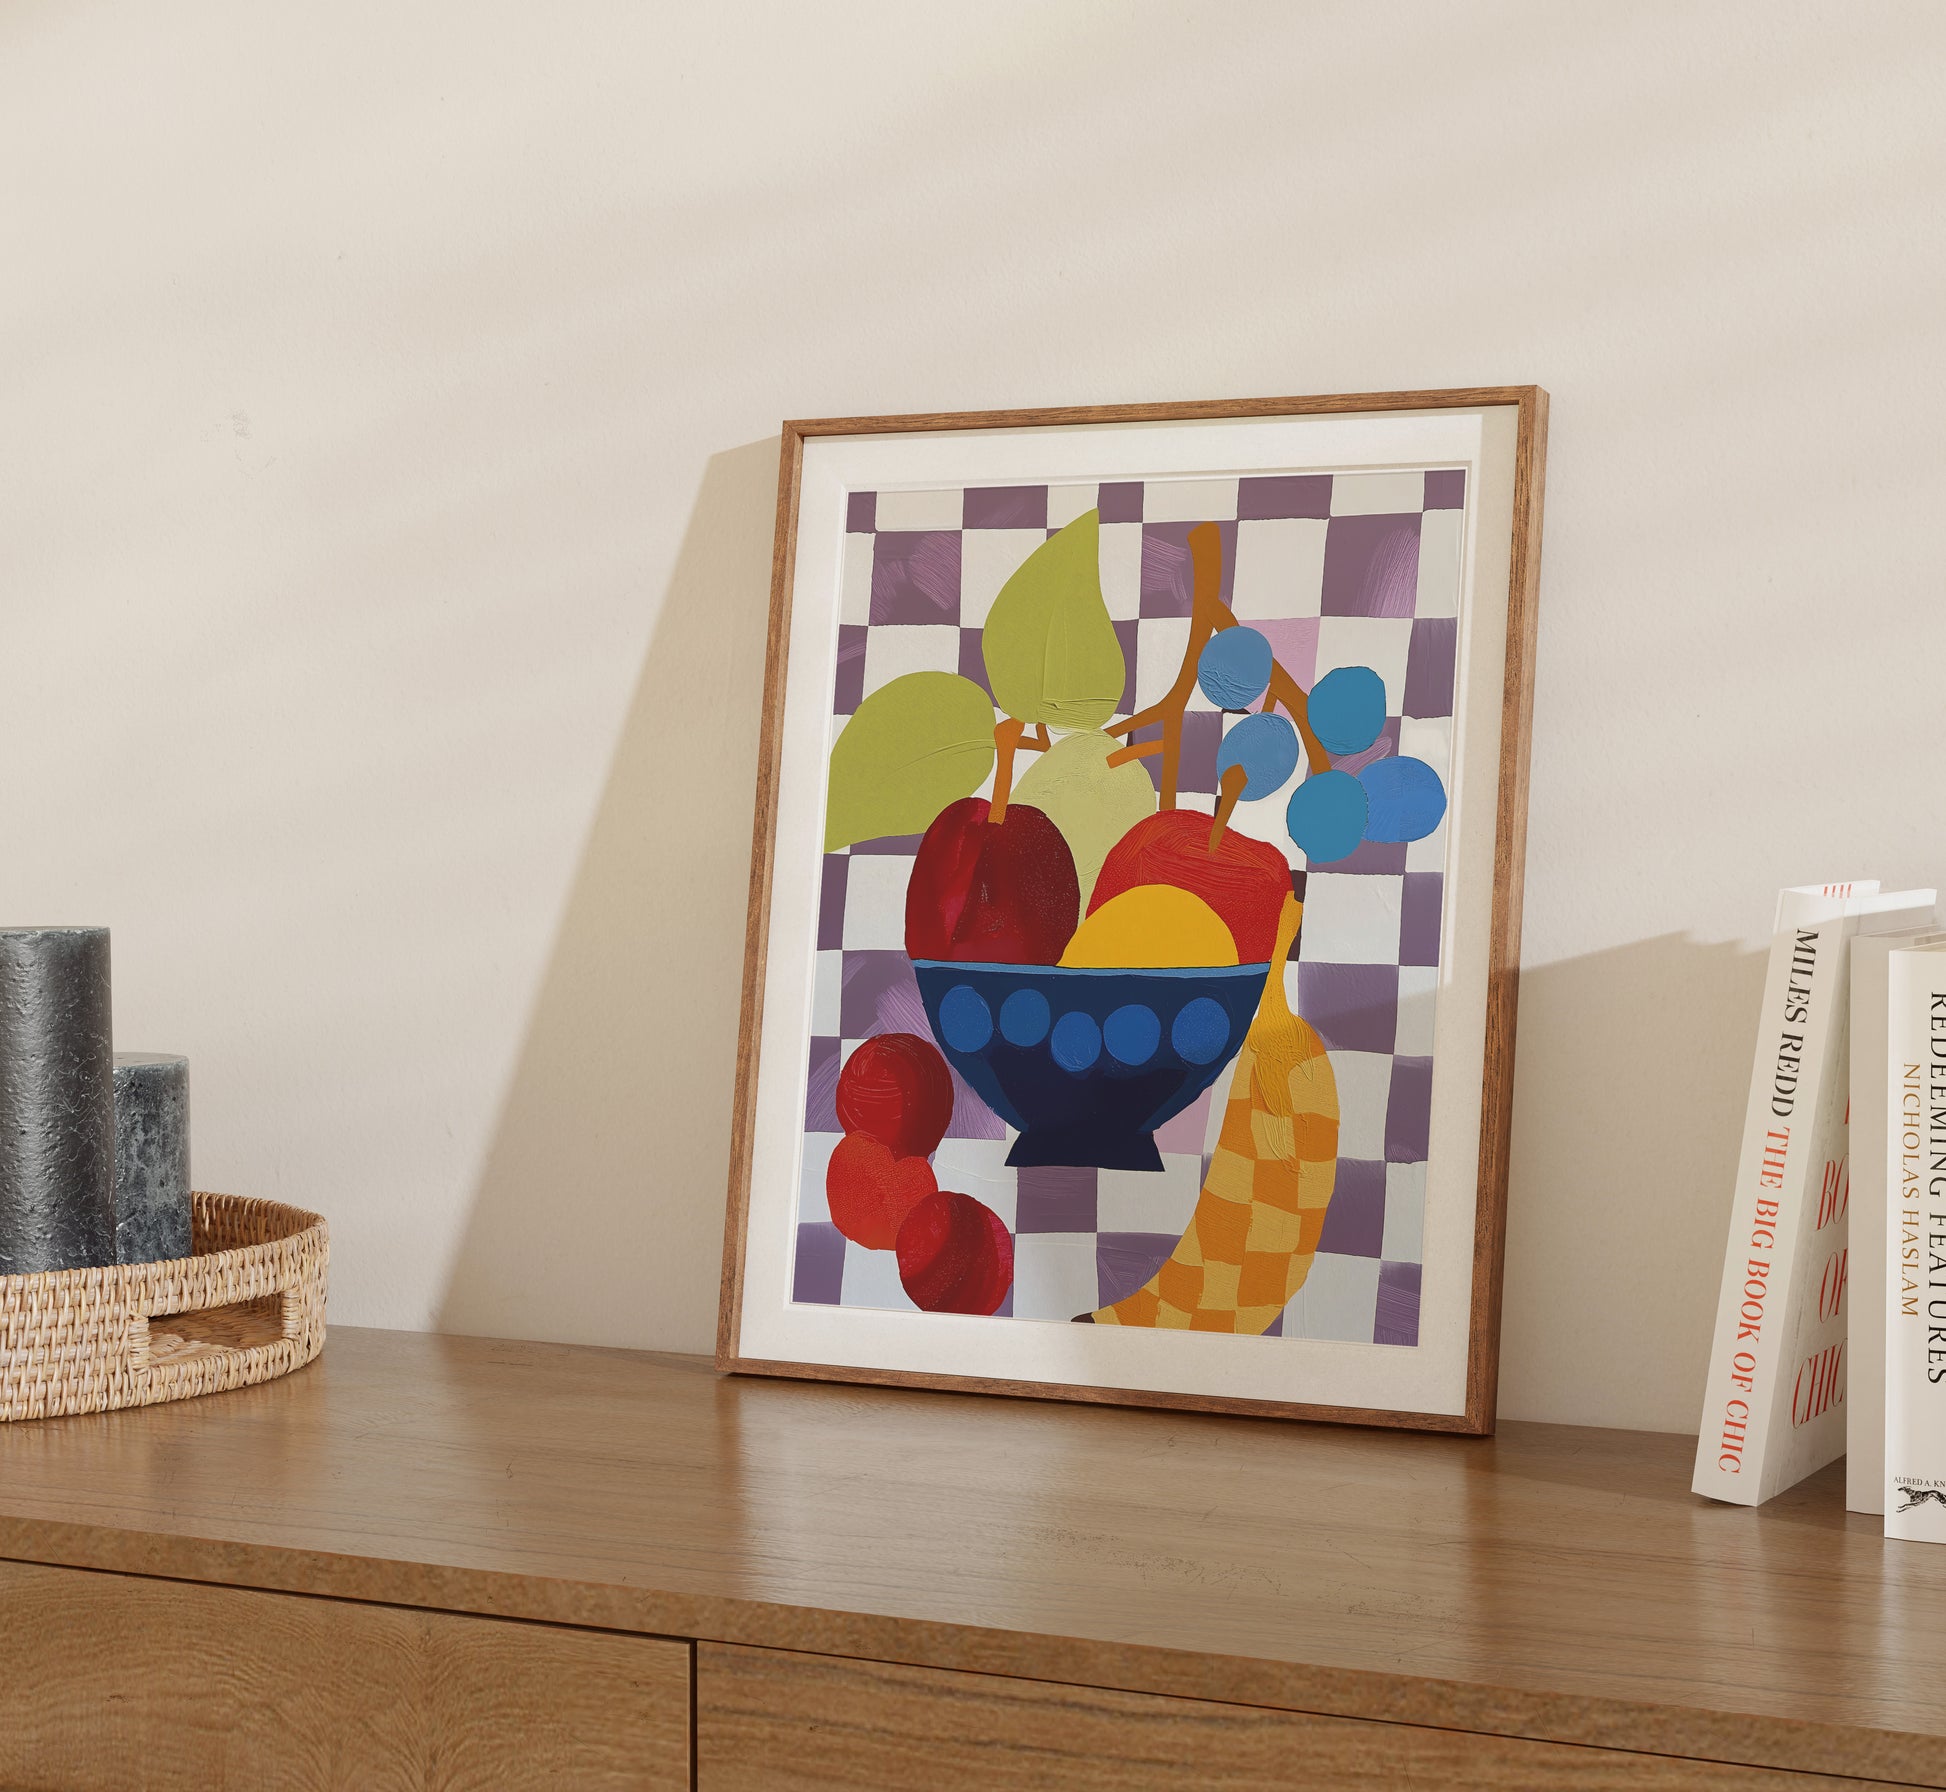 A framed abstract painting of fruit on a checkered background displayed on a wooden shelf.